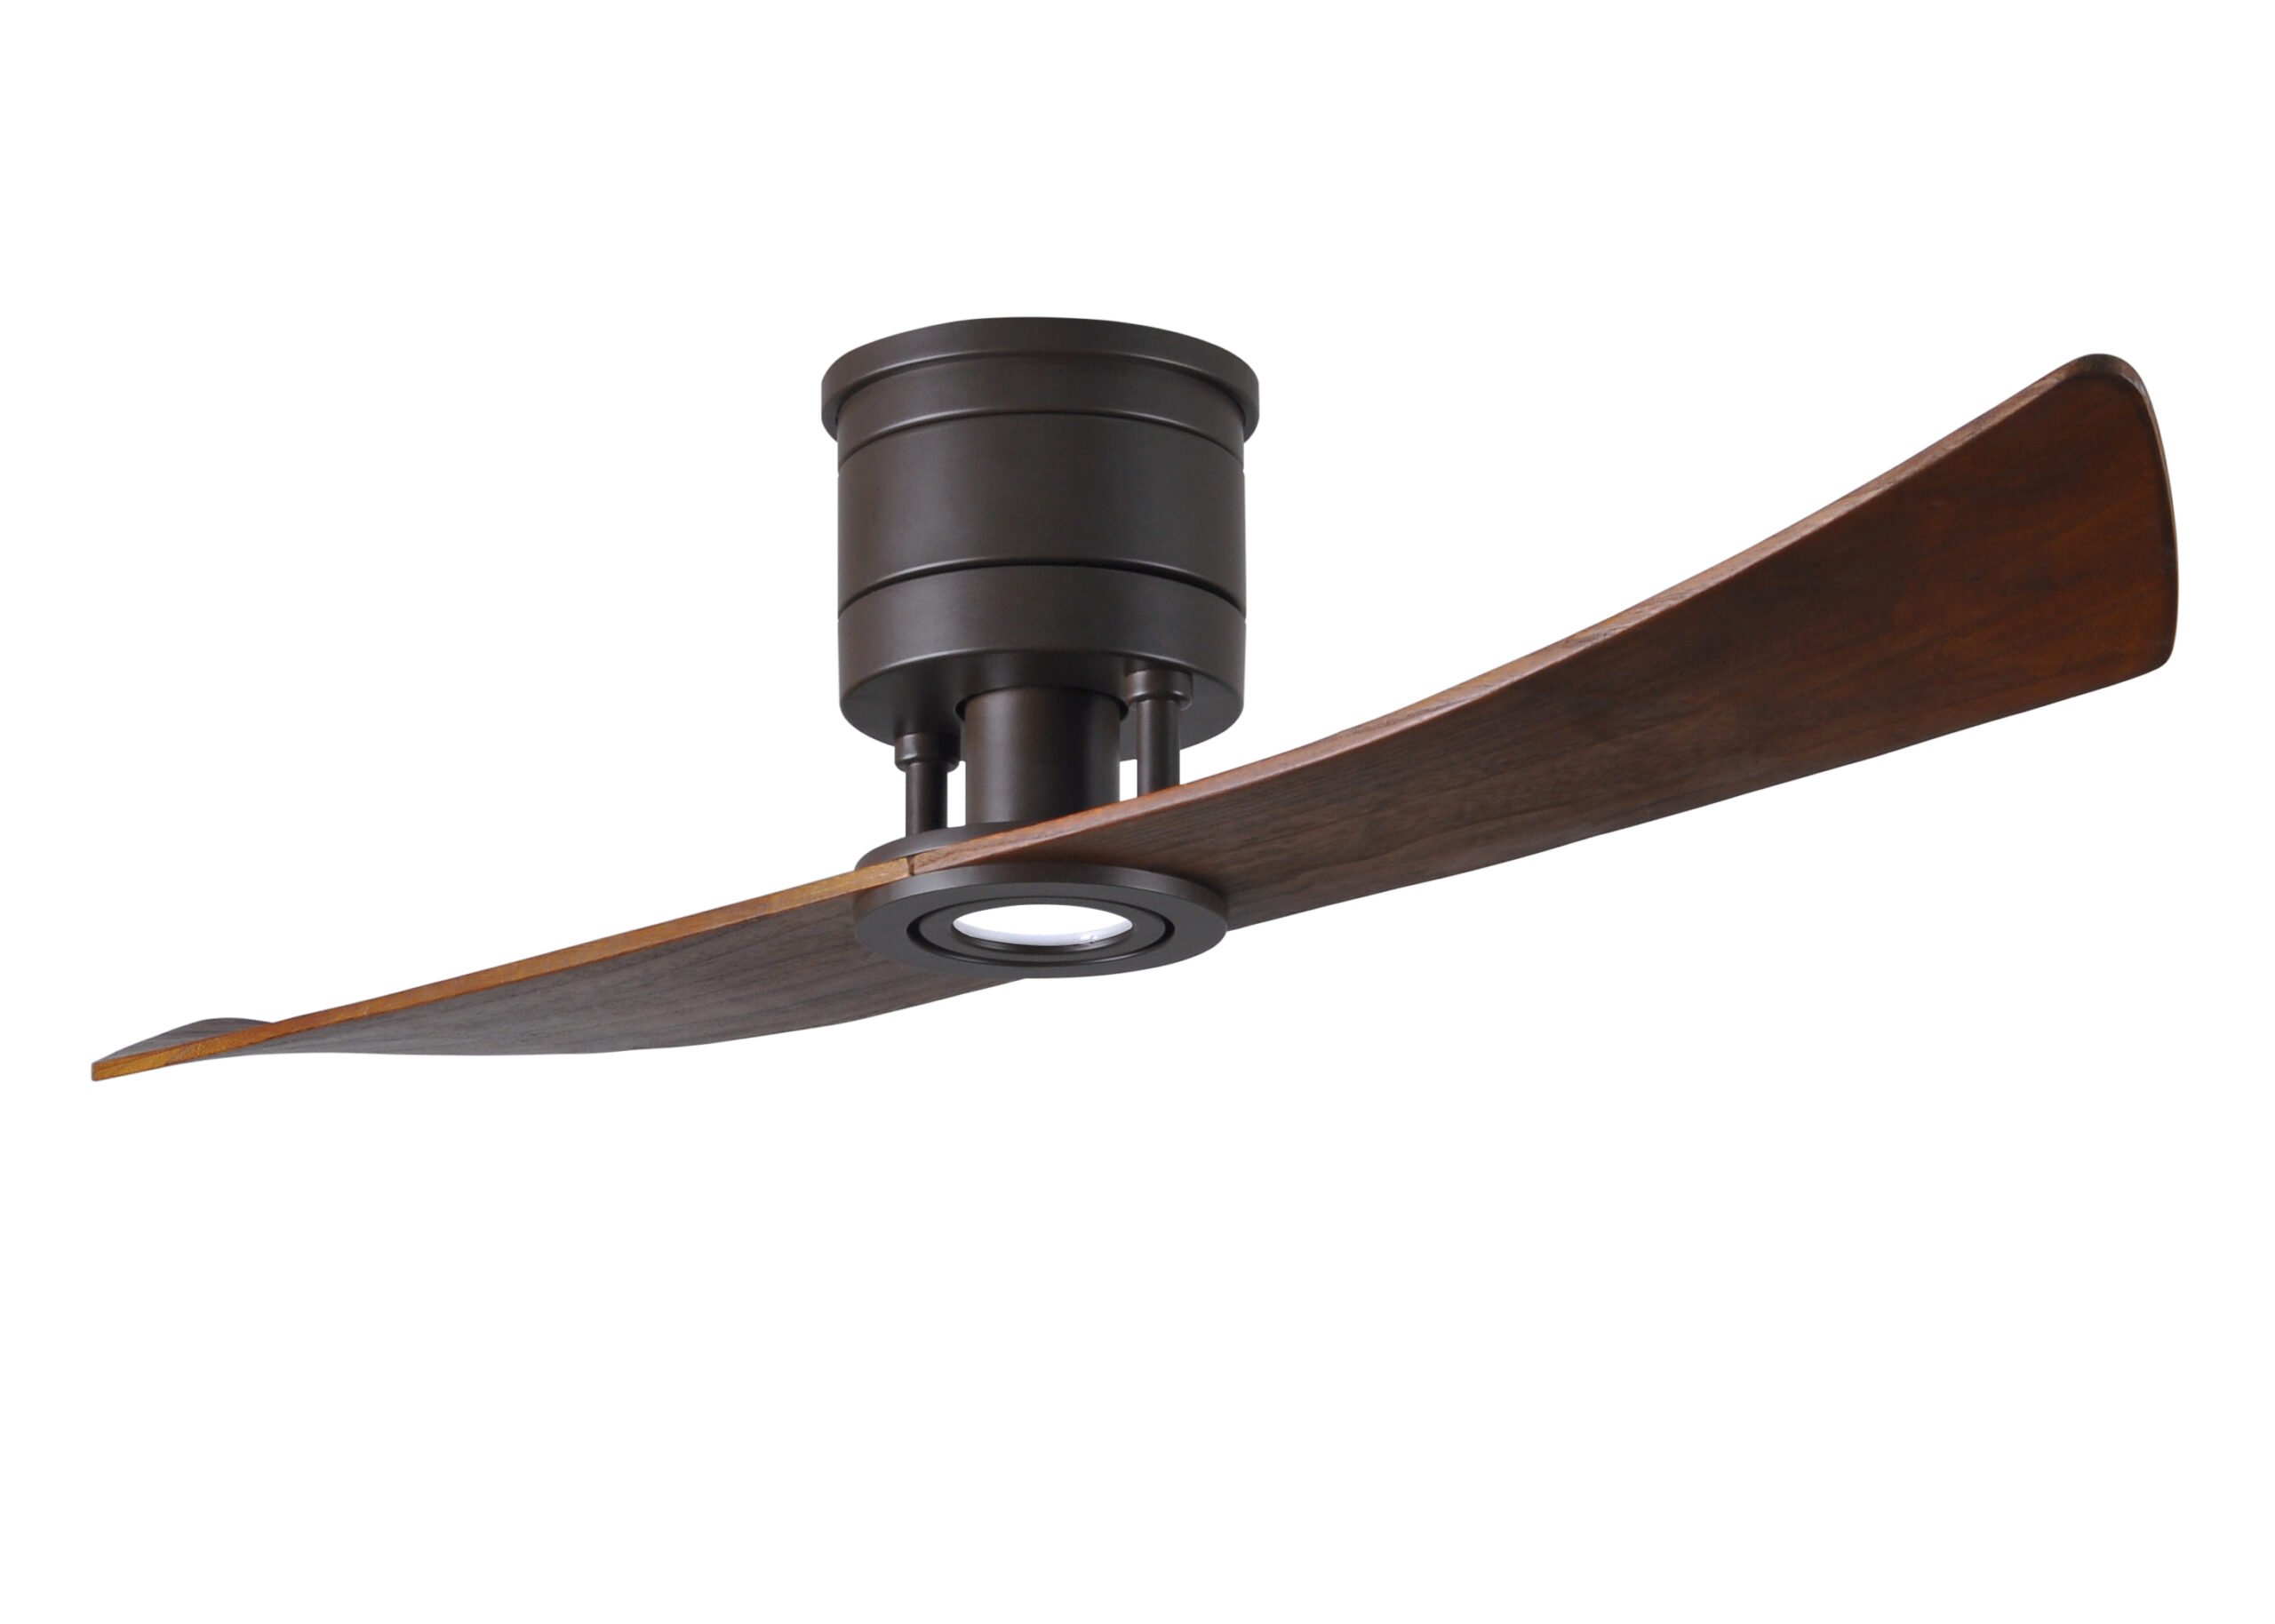 Lindsay 6-speed ceiling fan in Textured Bronze finish with 52